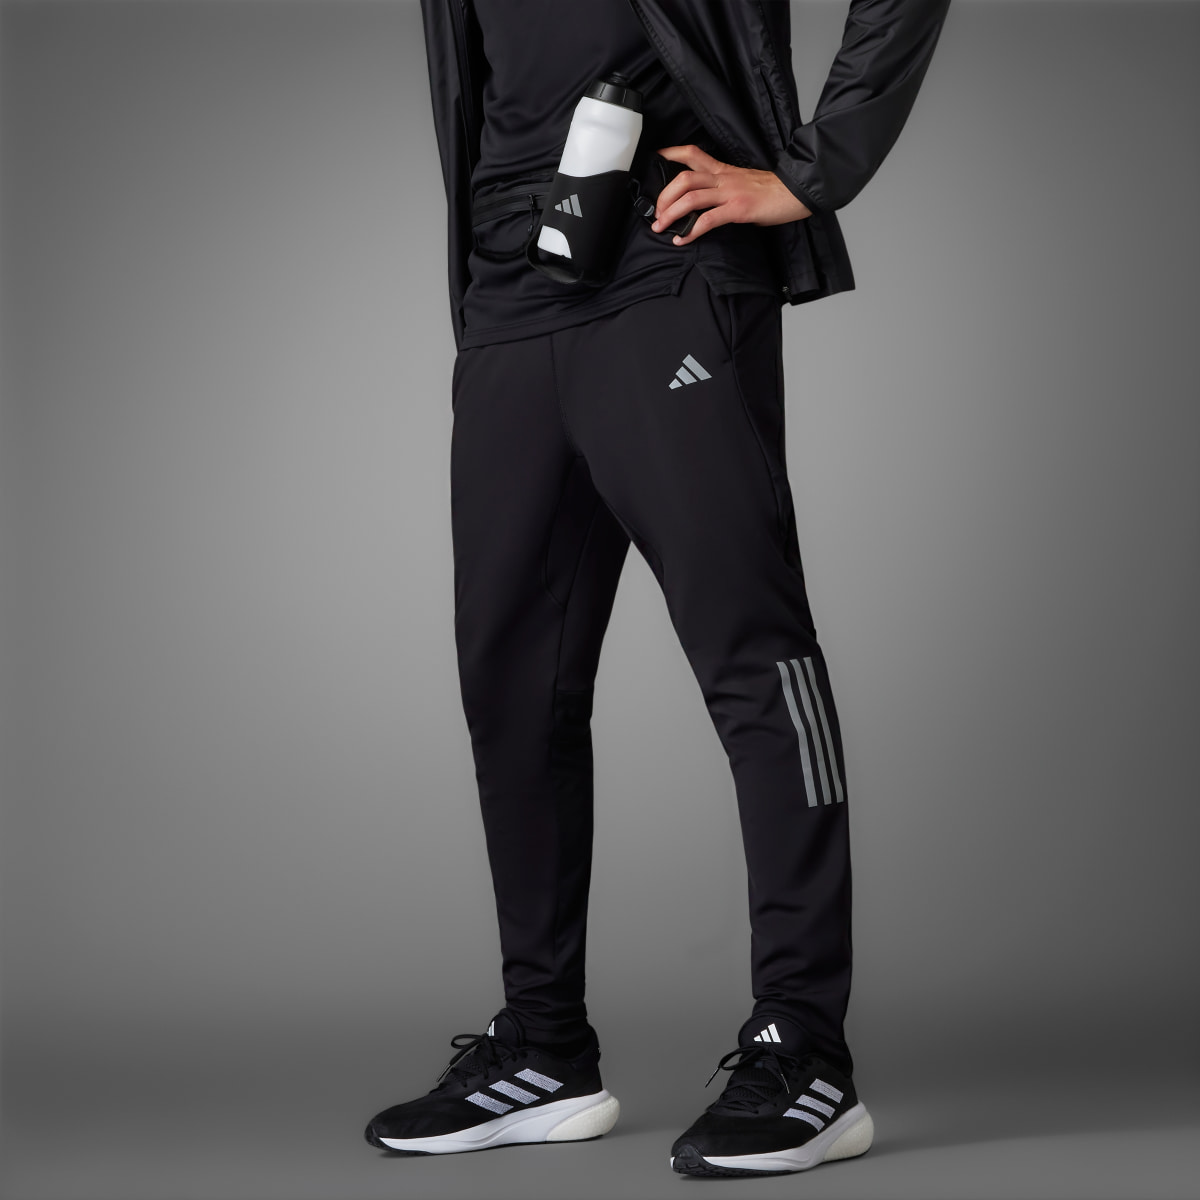 Adidas Own the Run Astro Knit Joggers. 6